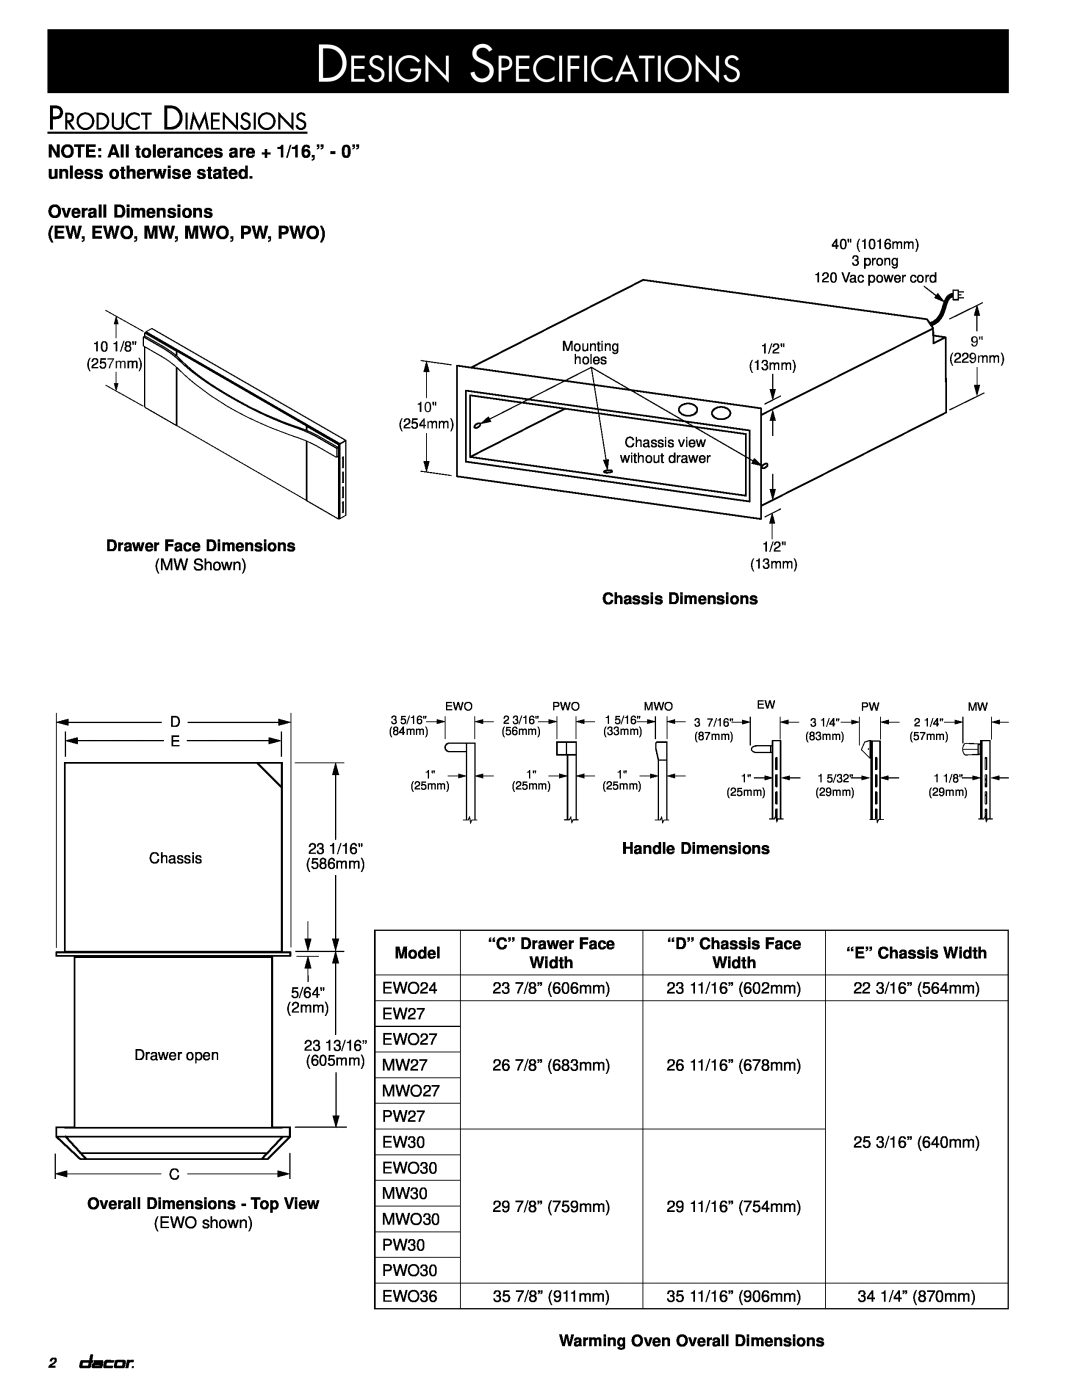 Dacor IWO, IOWO Design Specifications, Product Dimensions, NOTE All tolerances are + 1/16,” - 0” unless otherwise stated 